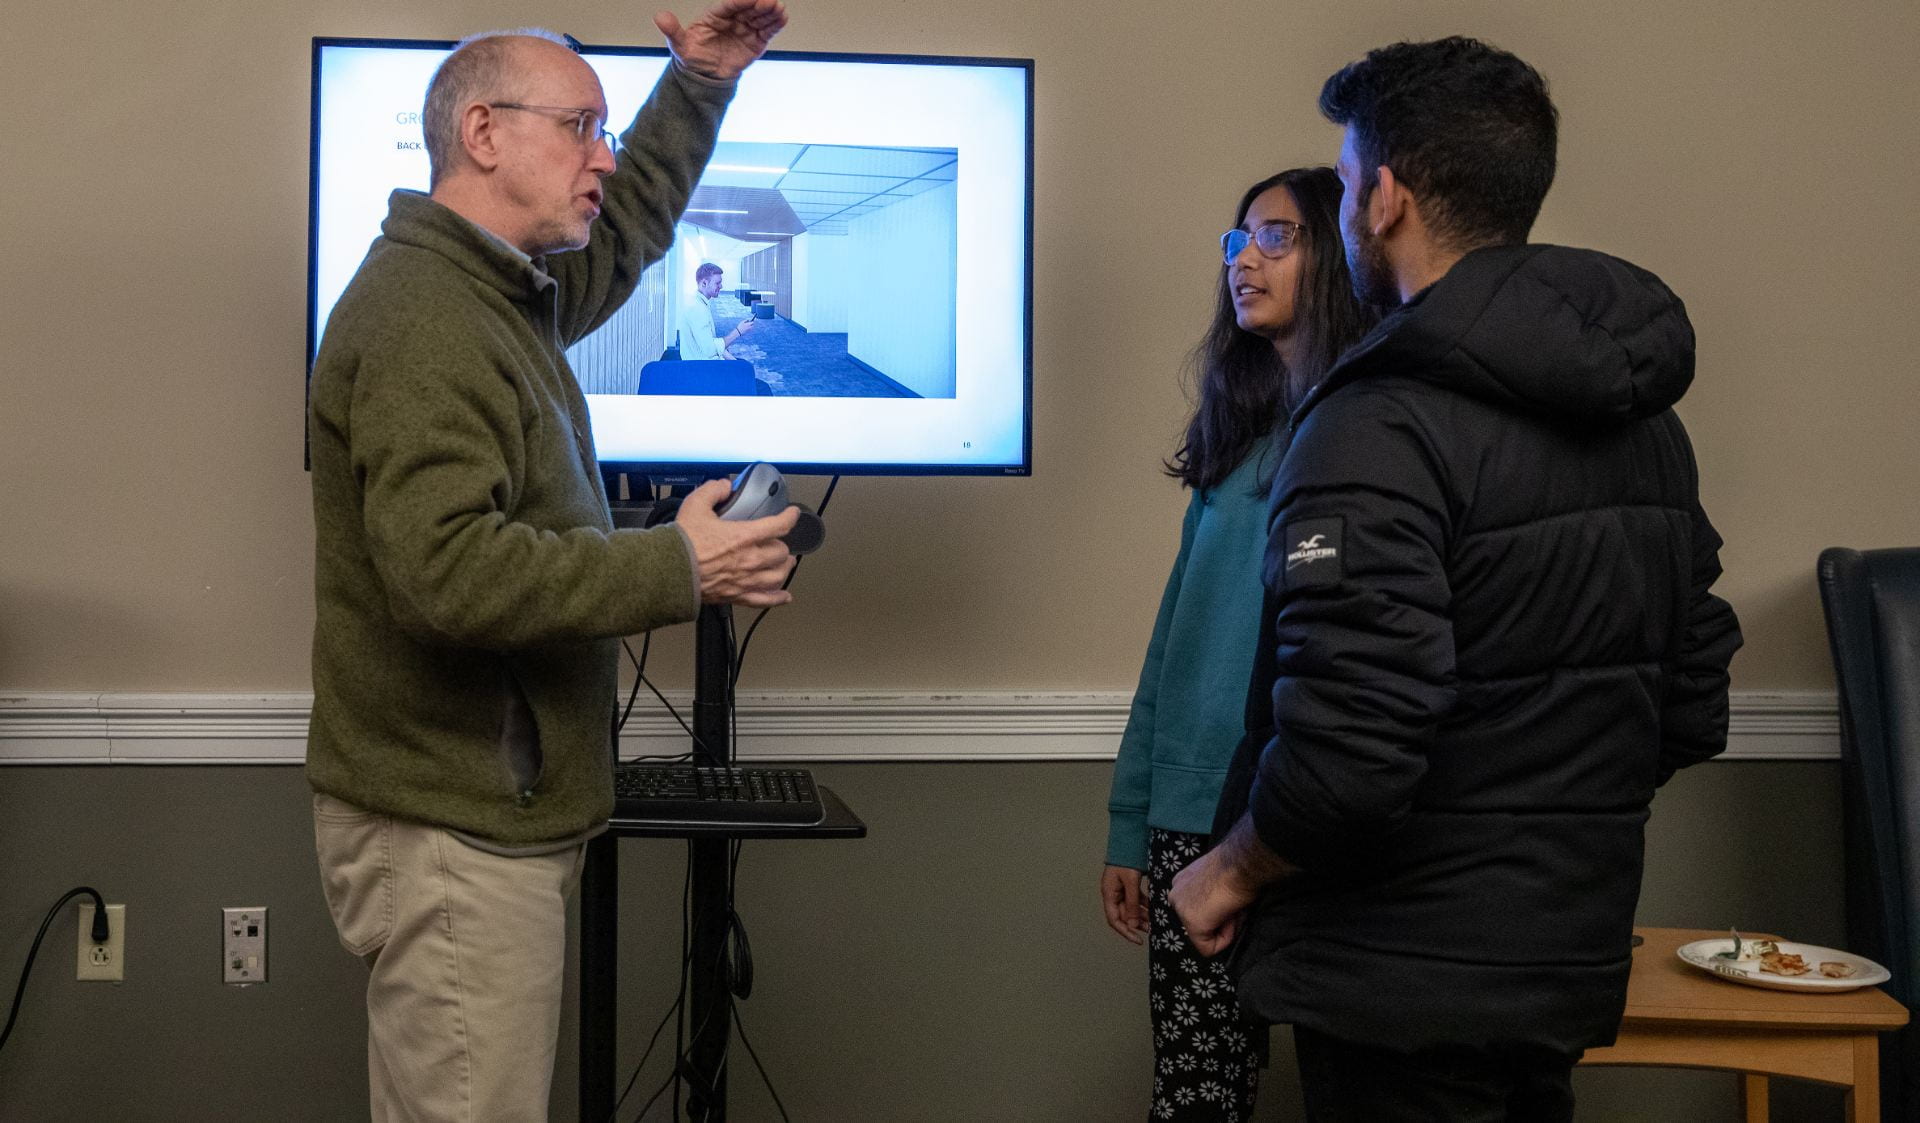 Dean Mather showing students renovation designs on a tv screen